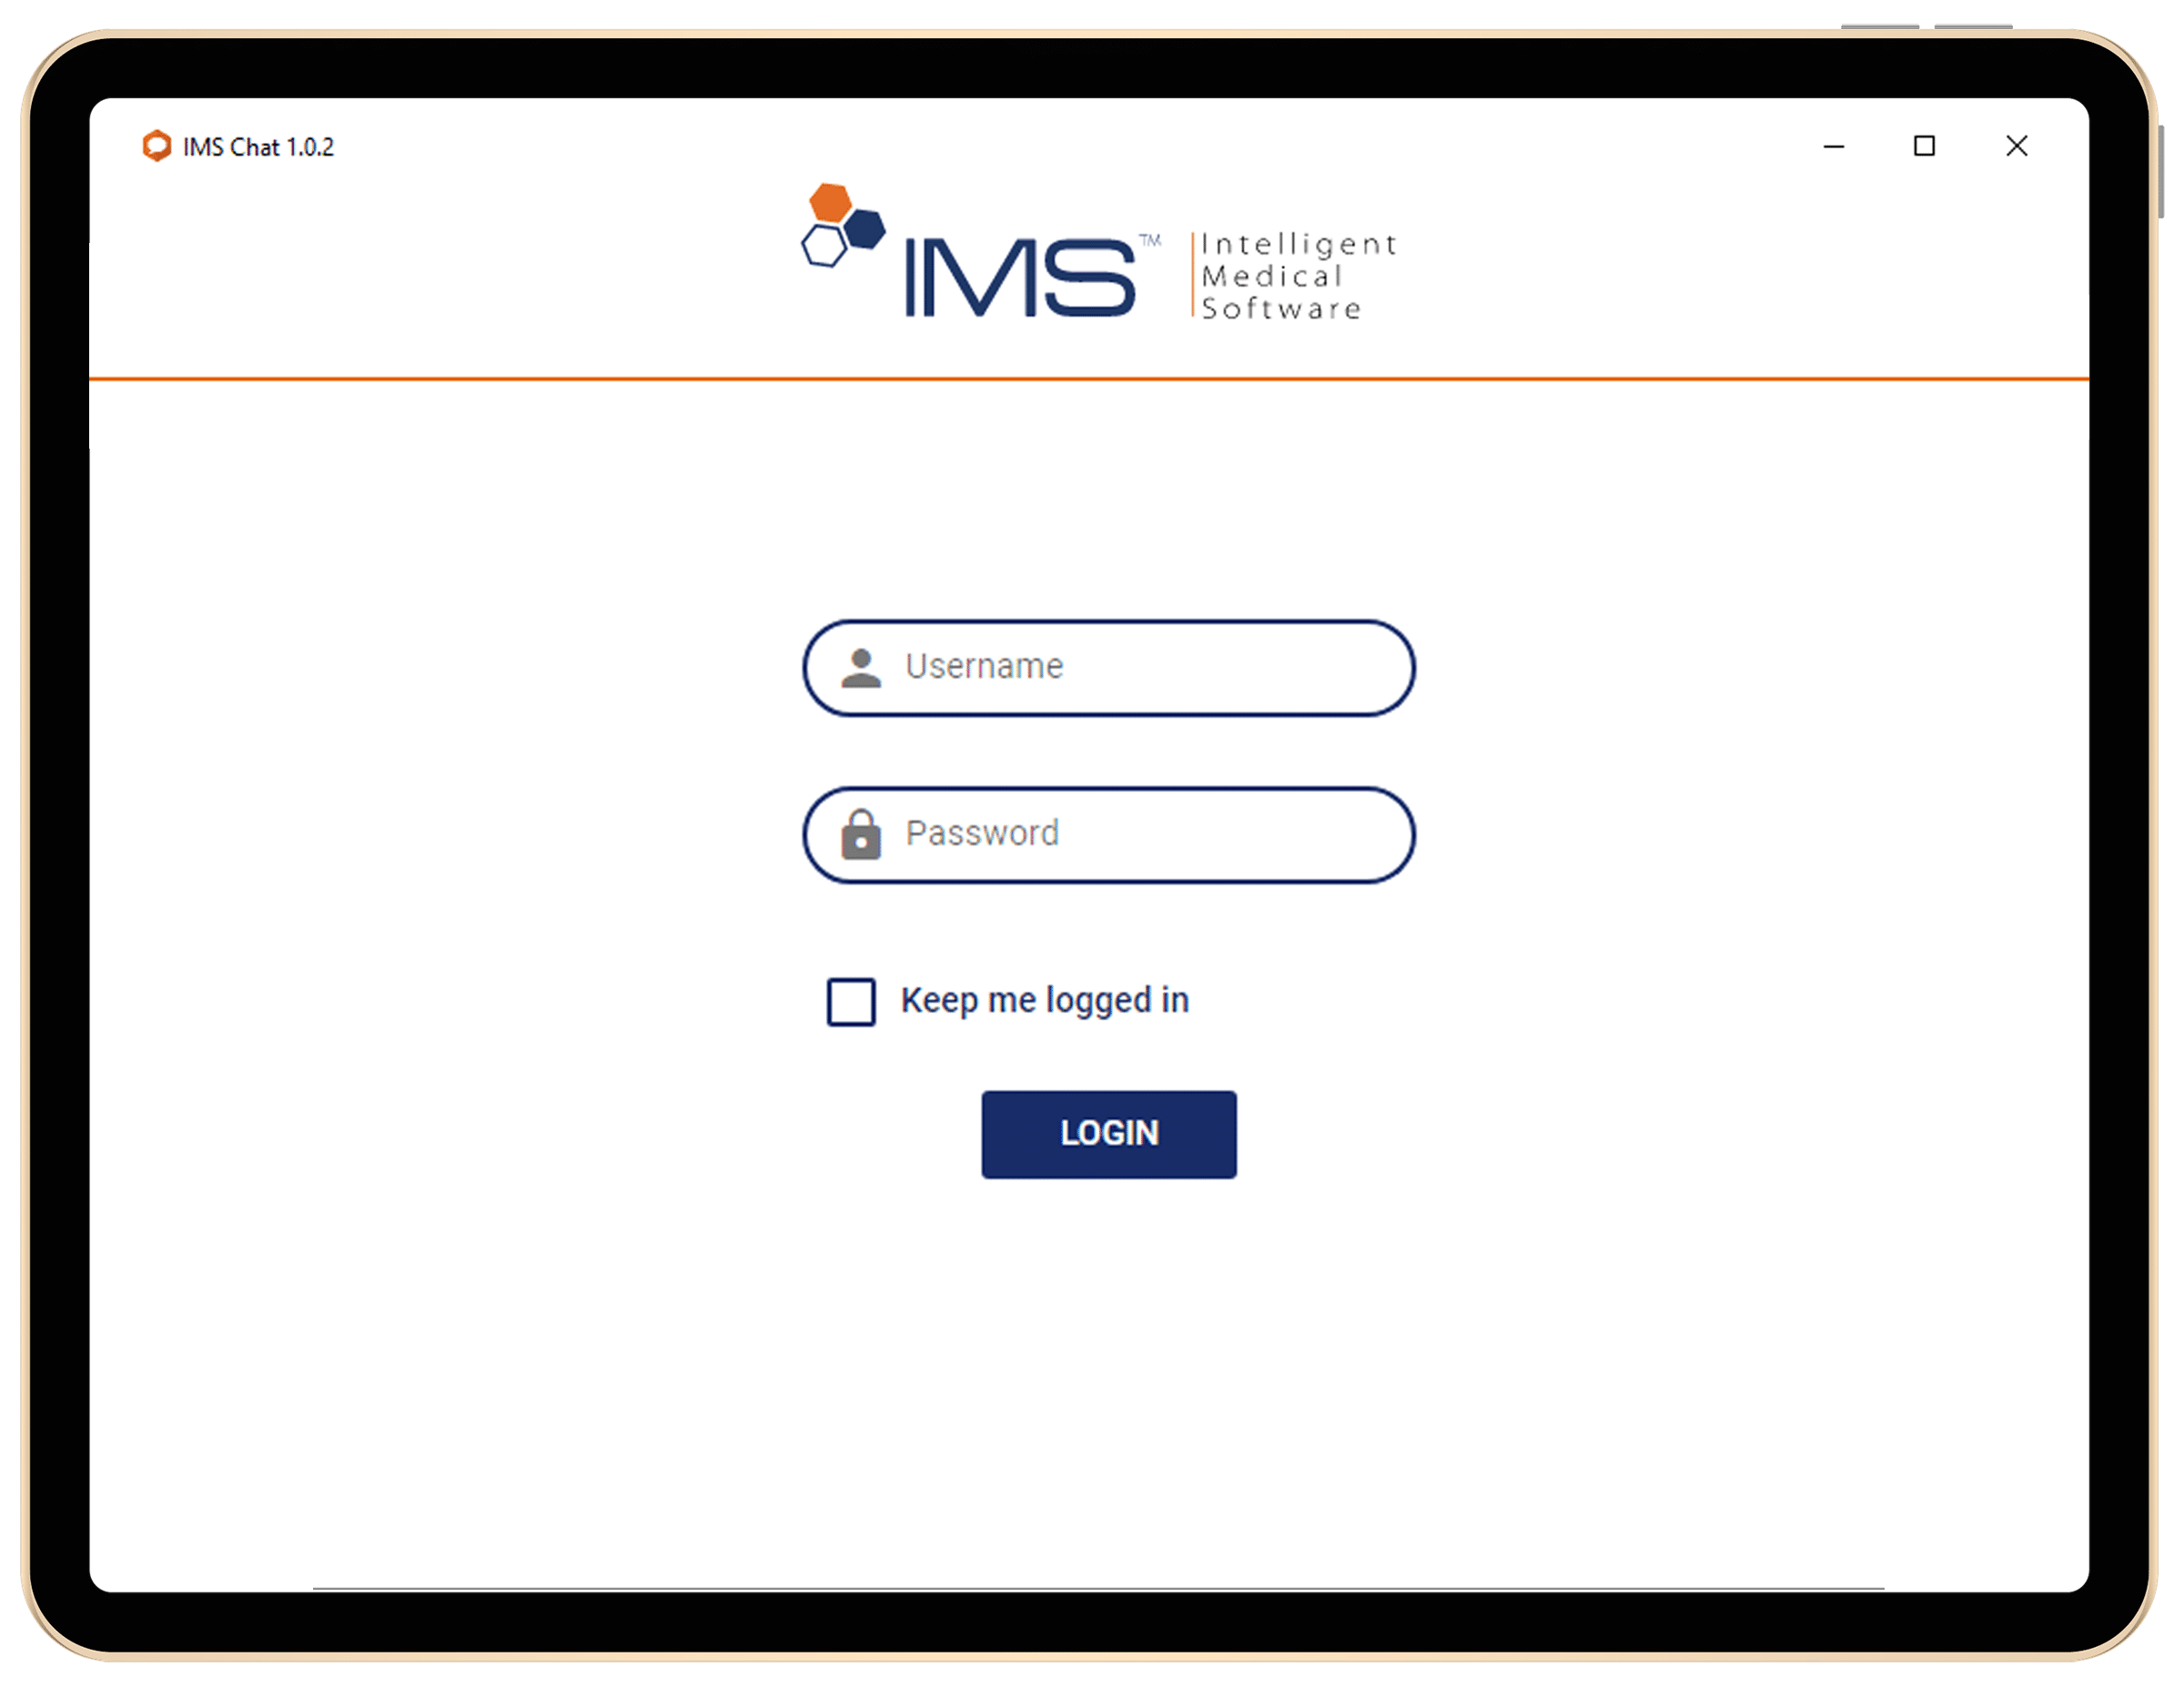 IMS Chat Log-in Screen